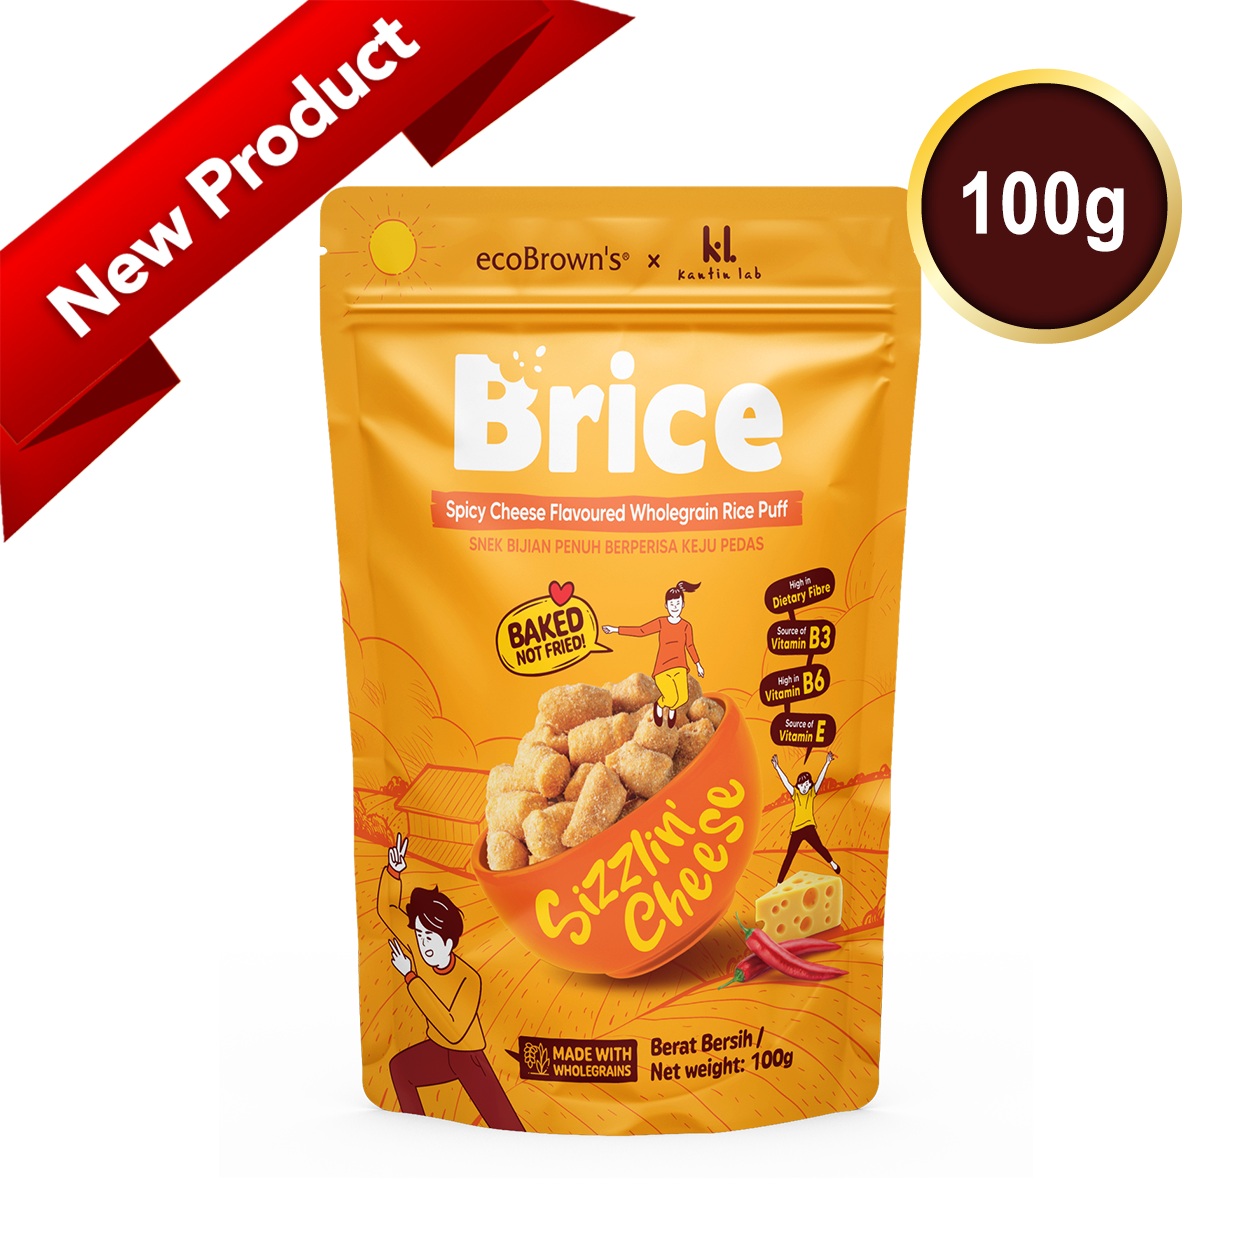 ecoBrown’s Brice Spicy Cheese Flavoured Wholegrain Rice Puff [100g]